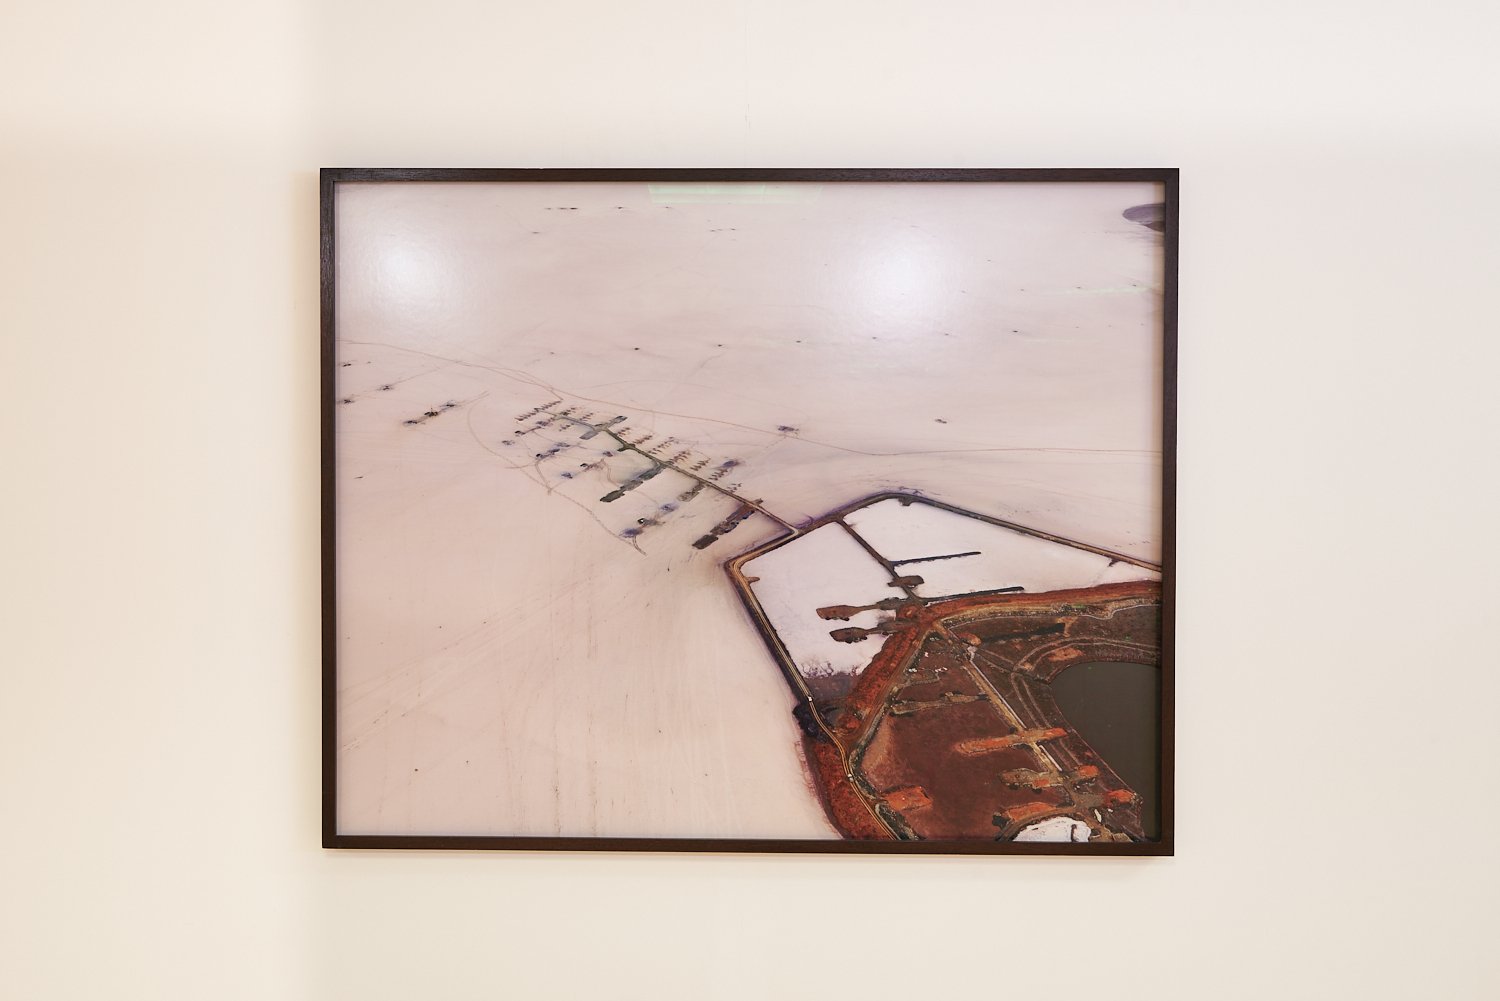  ‘Silver Lake Operations #15, Lake Lefroy, Western Australia’, 2007 by Edward Burtynsky (currently shown at GIANT Gallery, on loan from Flowers Gallery). ©️ Edward Burtynsky. All rights reserved. Exhibition photography by Ed Hill for GIANT. 